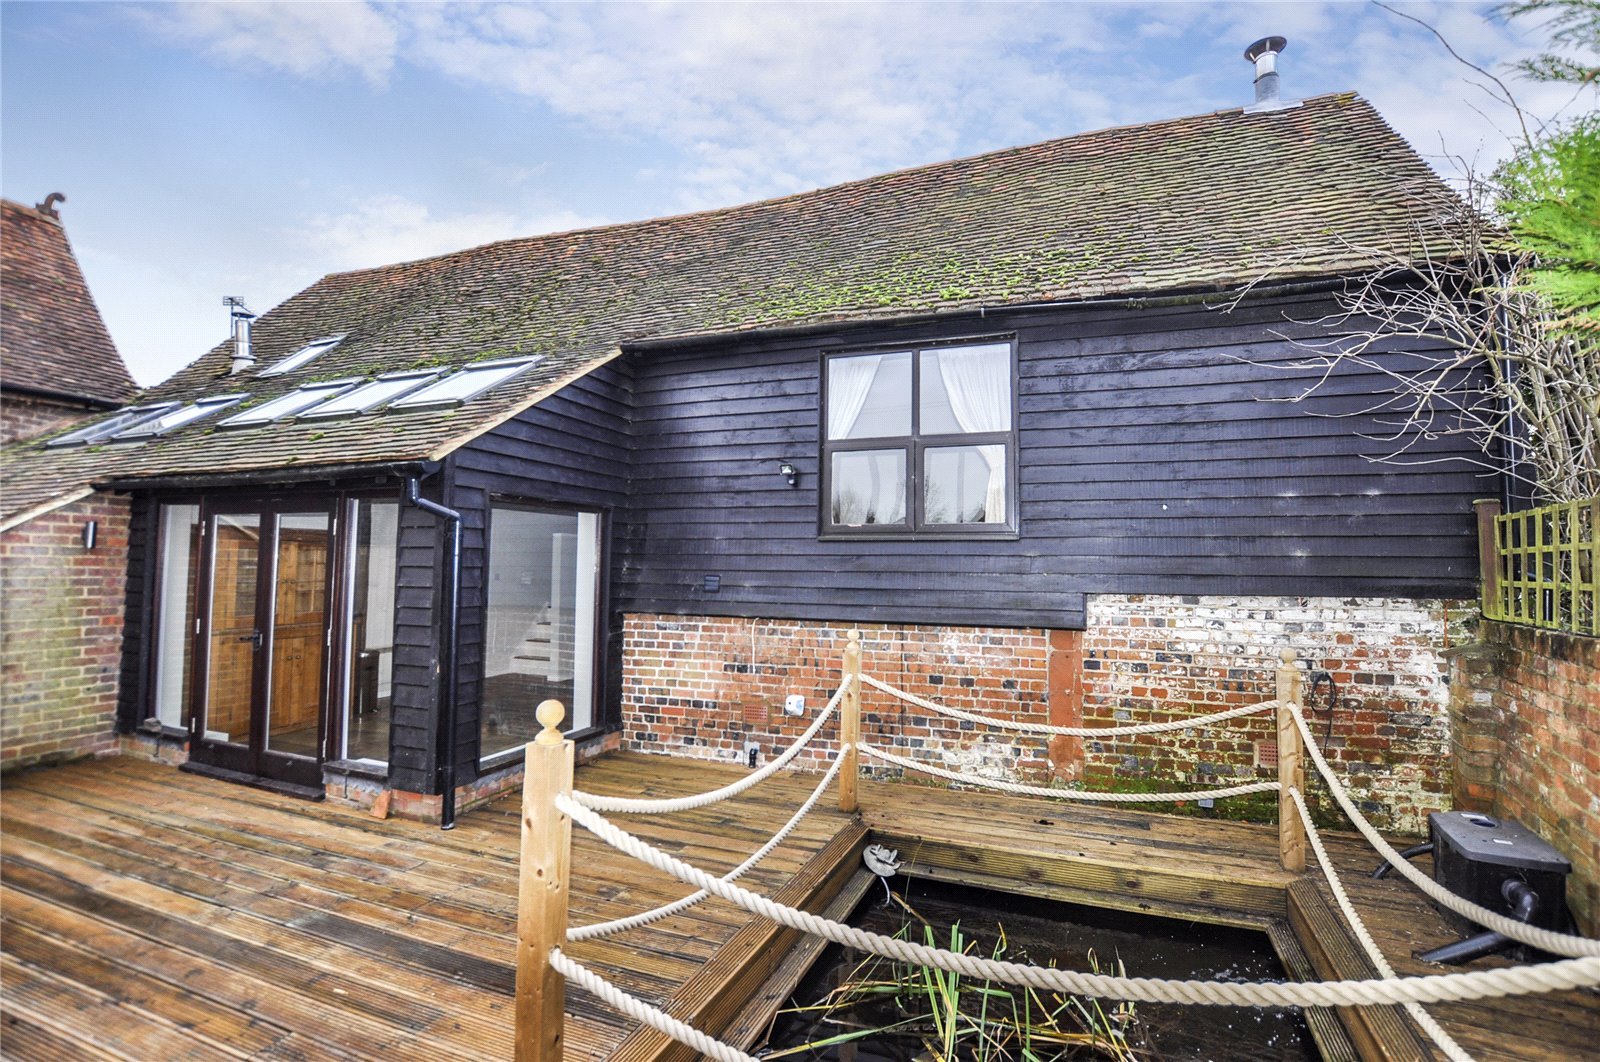 1 bedroom  Barn Conversions to rent in Chesham